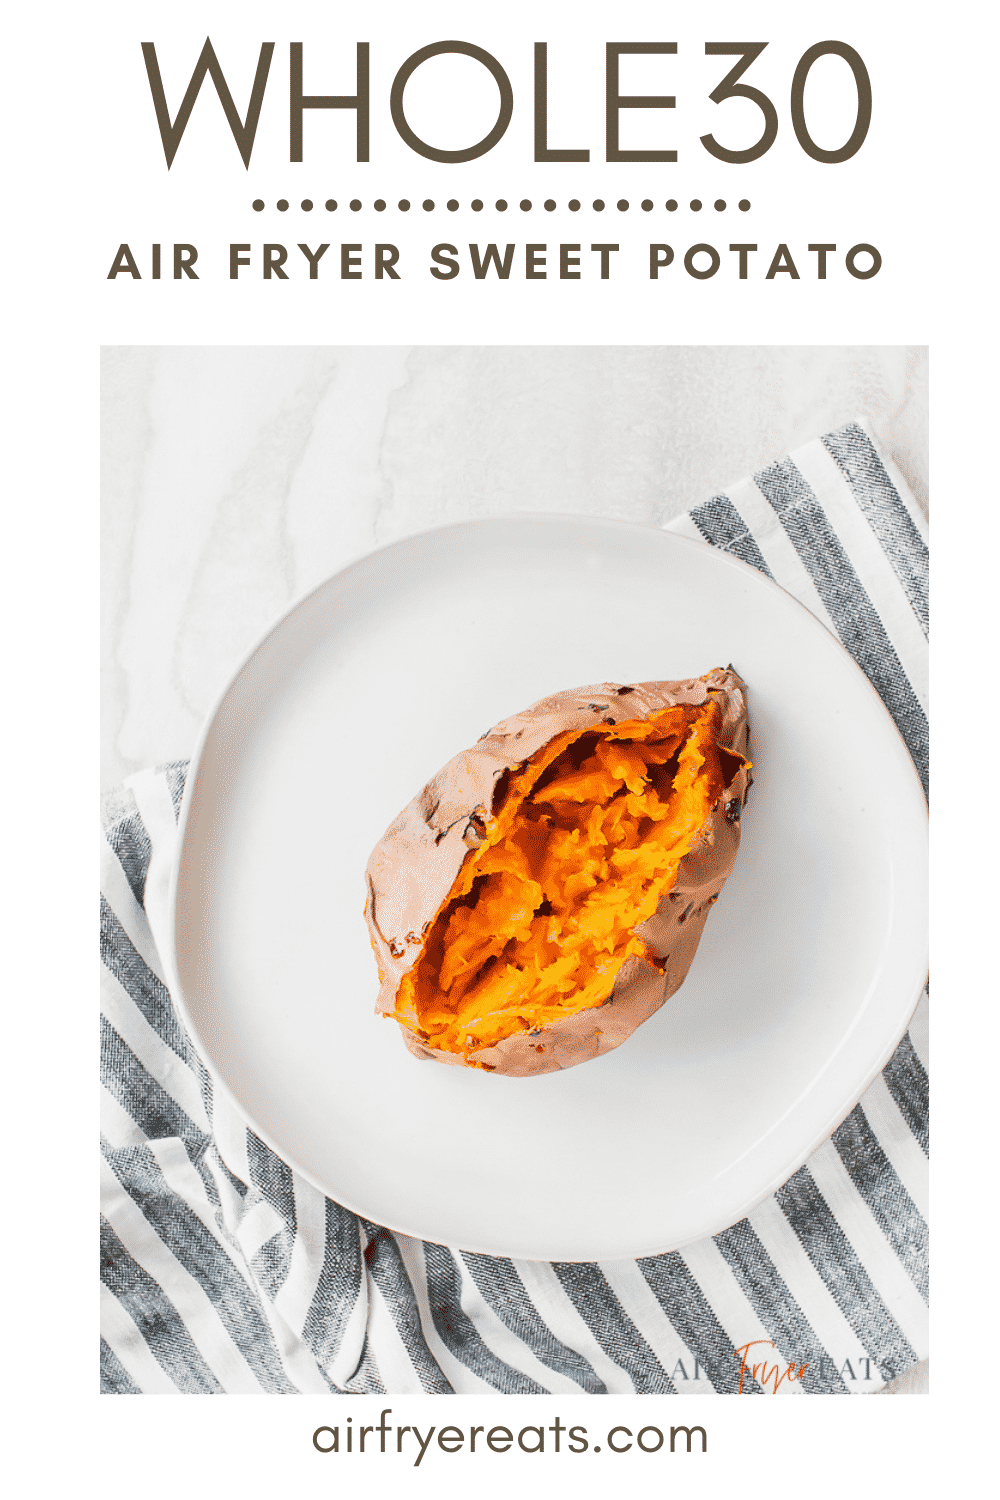 Cooking sweet potatoes doesn't have to be a daunting task when you have an air fryer in your kitchen! This Air Fryer Sweet Potato recipe results in fluffy, scrumptious sweet potatoes every single time! #sweetpotato #sweetpotatorecipes #airfryerrecipes via @vegetarianmamma